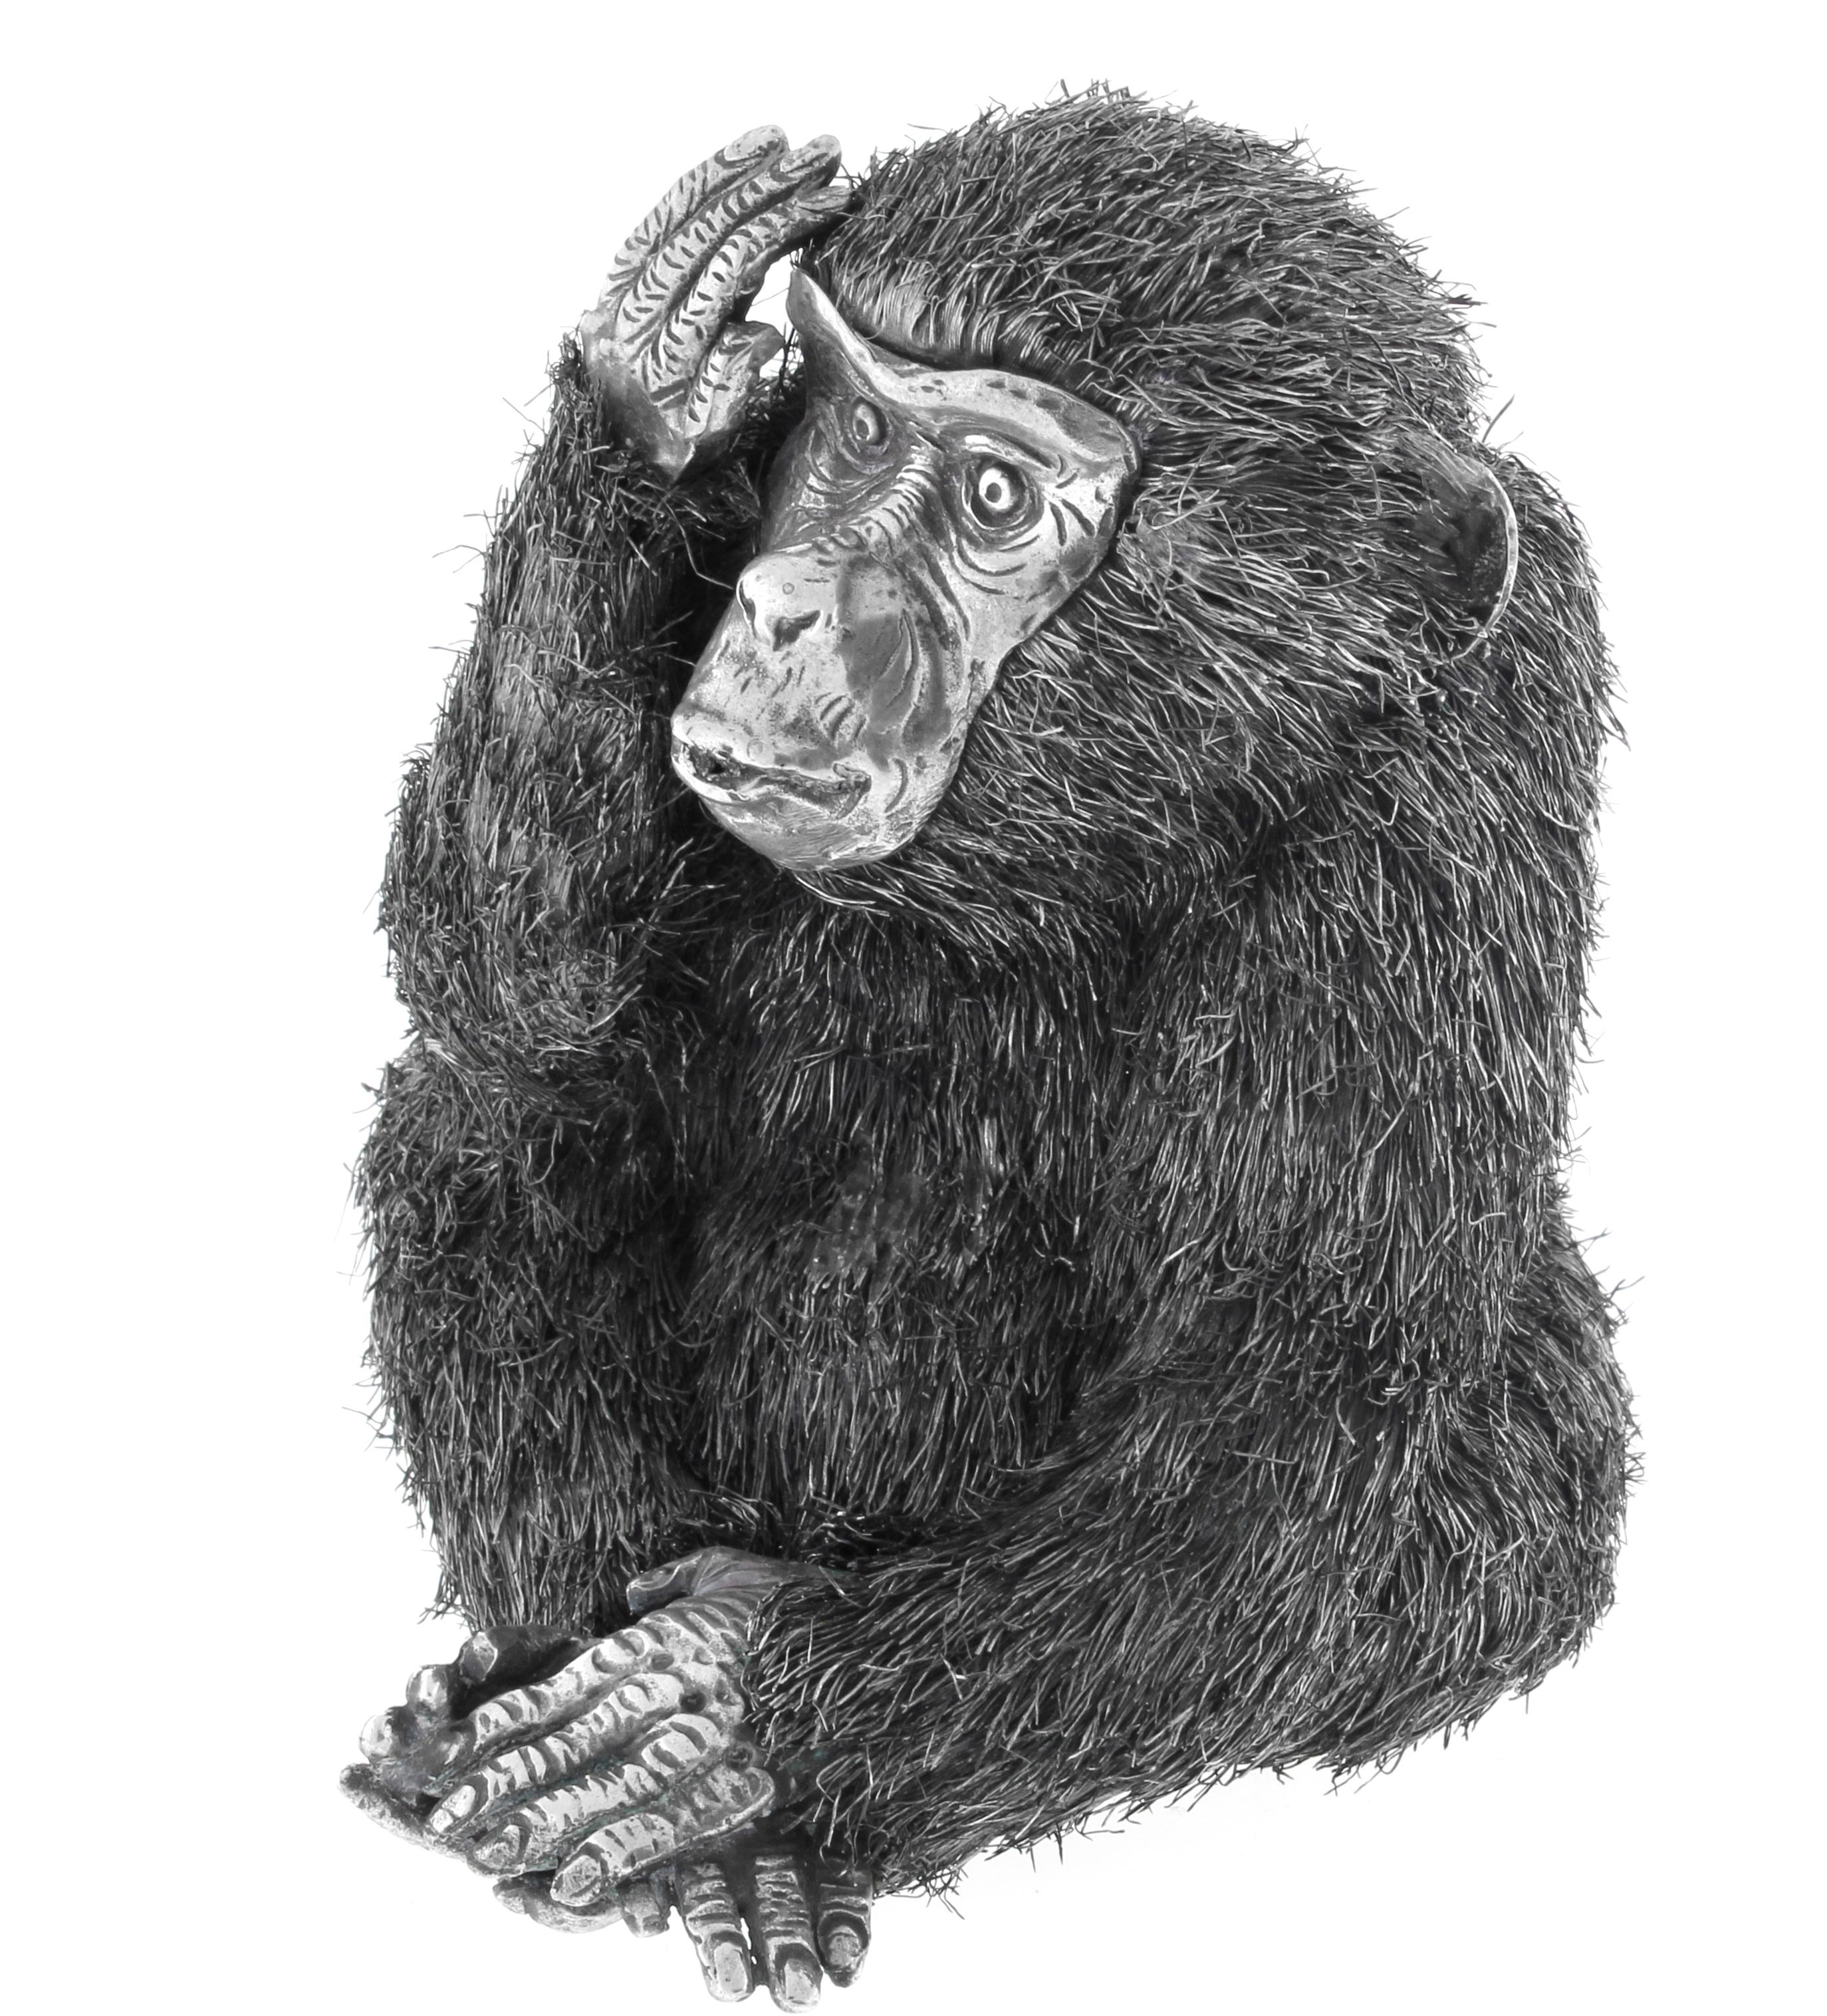 From acclaimed Italian jeweler Mario Buccellati, a realistically modeled seated monkey, with textured fur in silver wire.
Measurement 3¾ inches high
Signed: Buccellati
Metal: 800 silver
Italy circa 1960
